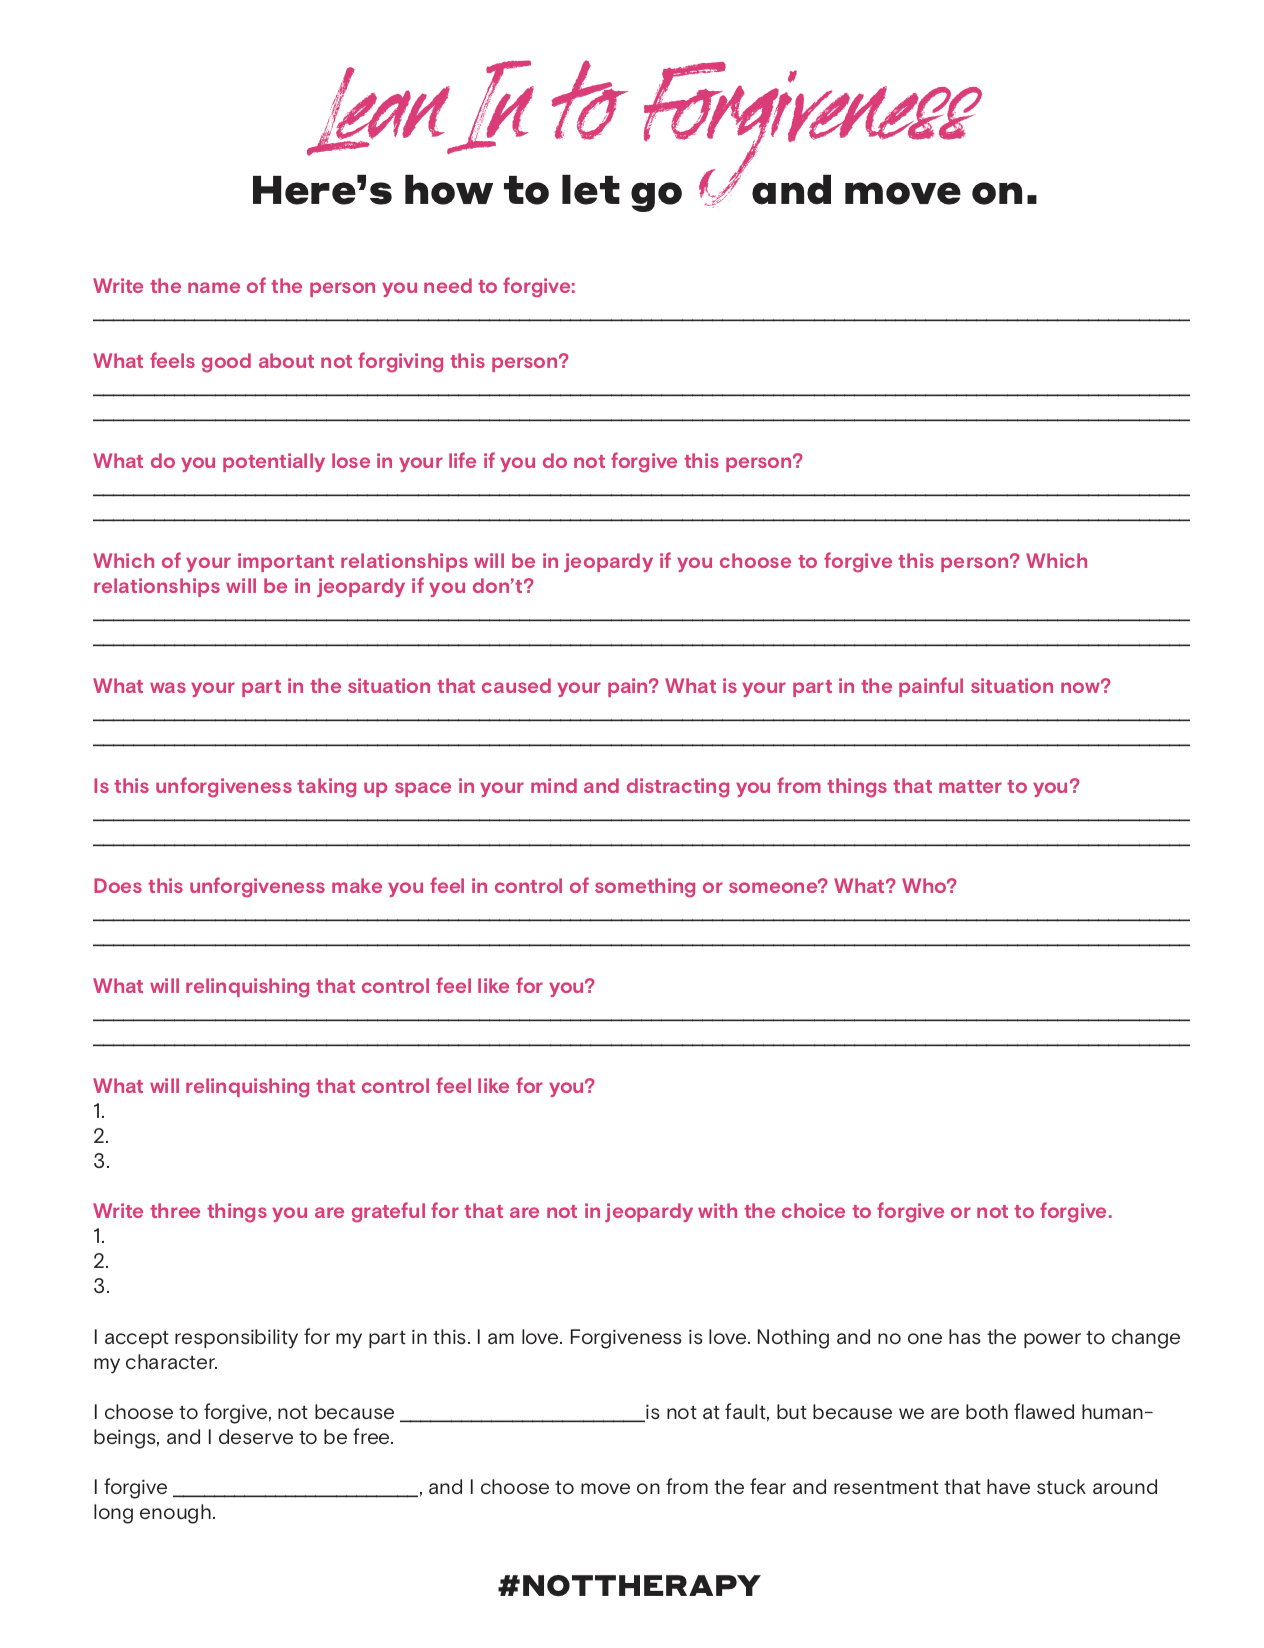 Dothisthing Lean In To Forgiveness  Not Therapy Pertaining To Self Forgiveness Worksheet